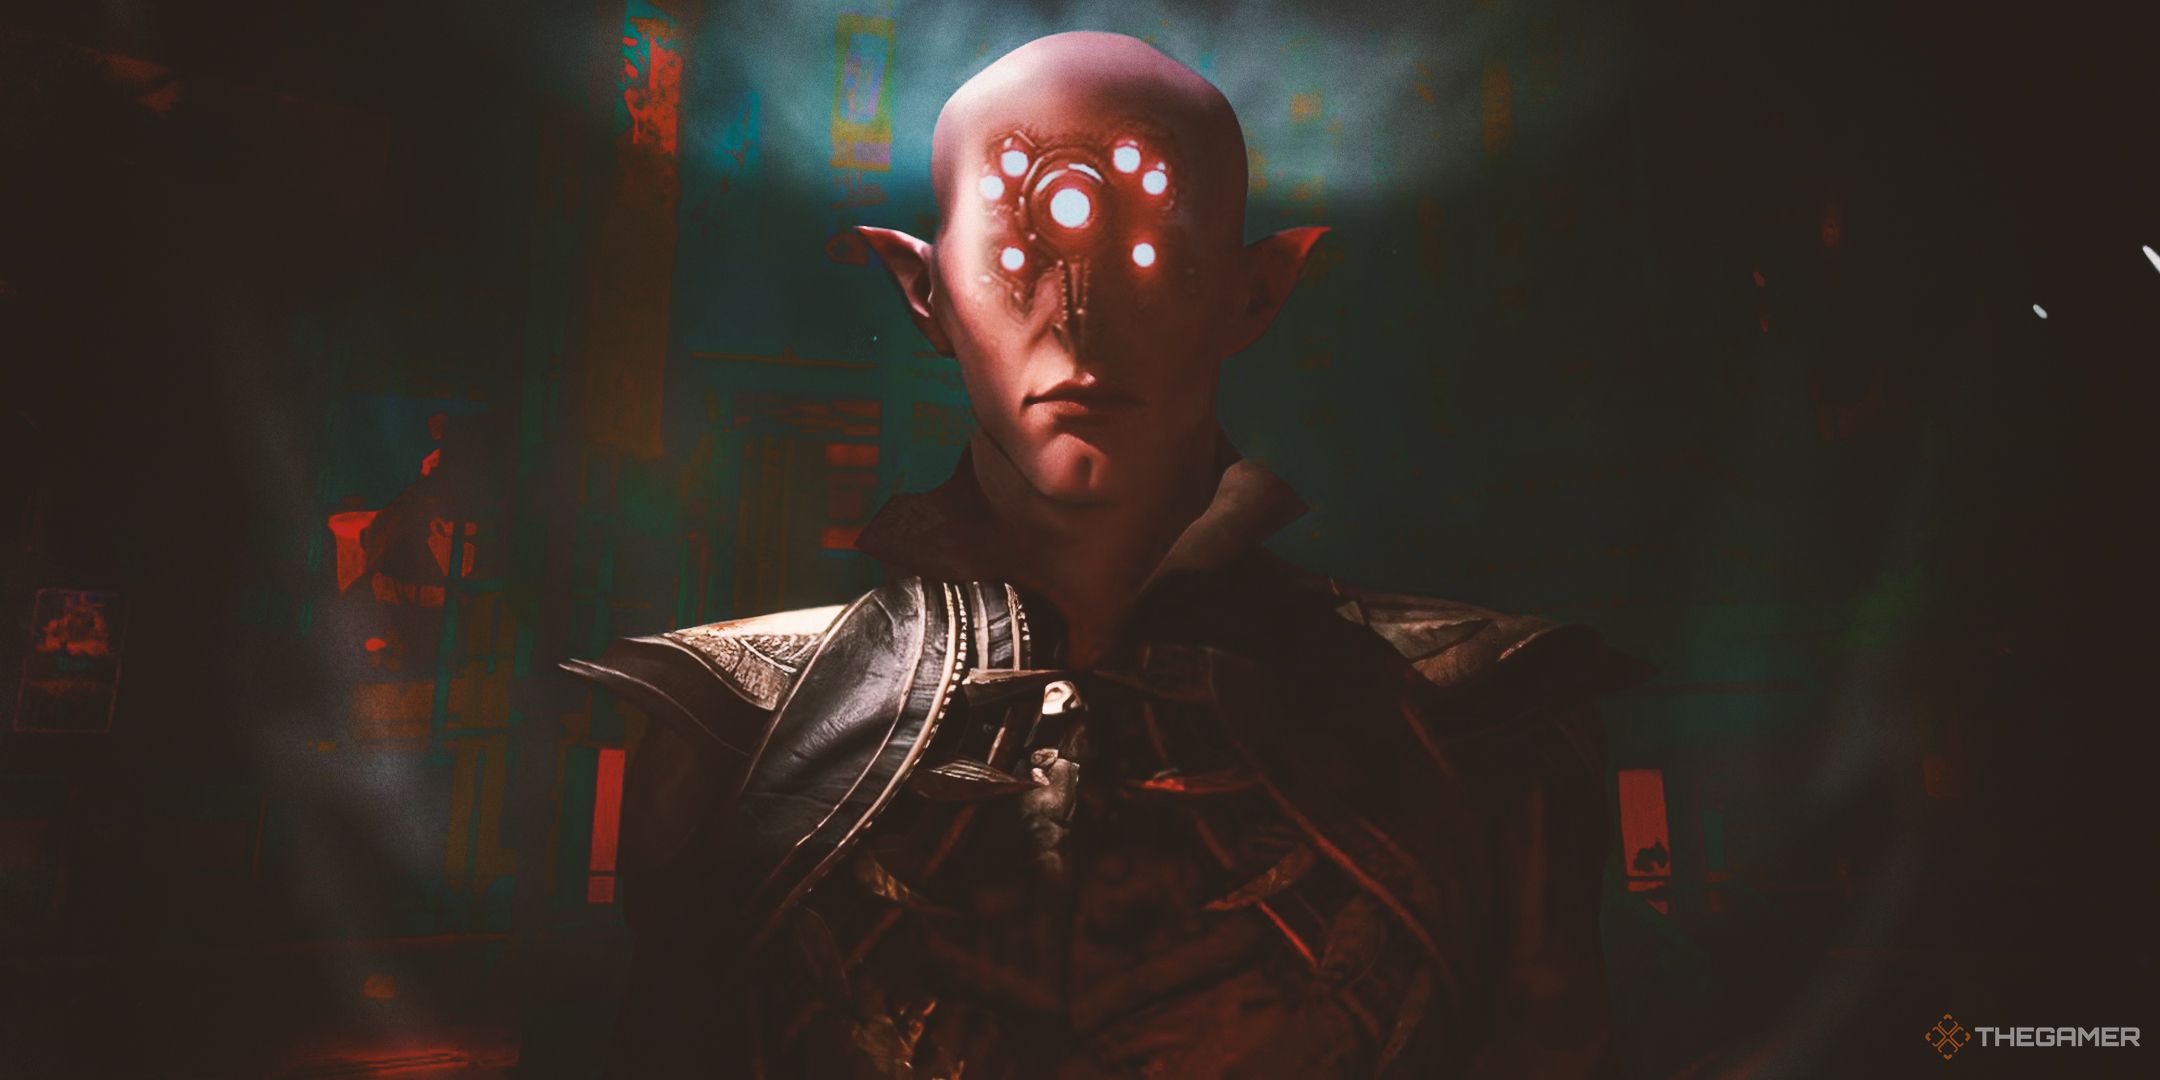 solas from dragon age with cyberpunk upgrades